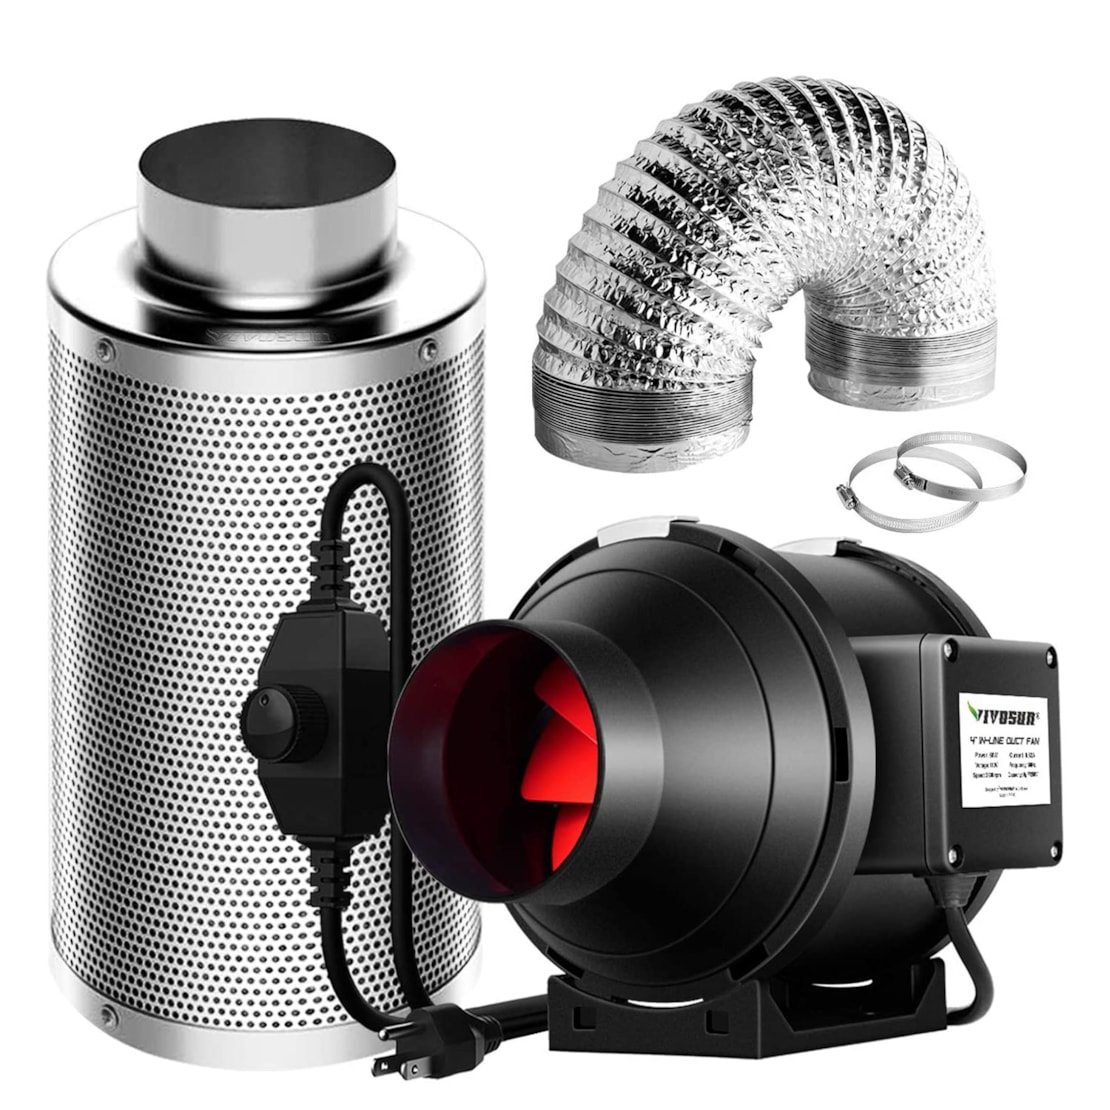 VIVOSUN 4-Inch 190 CFM Inline Duct Fan Kit with Carbon Filter and Ducting